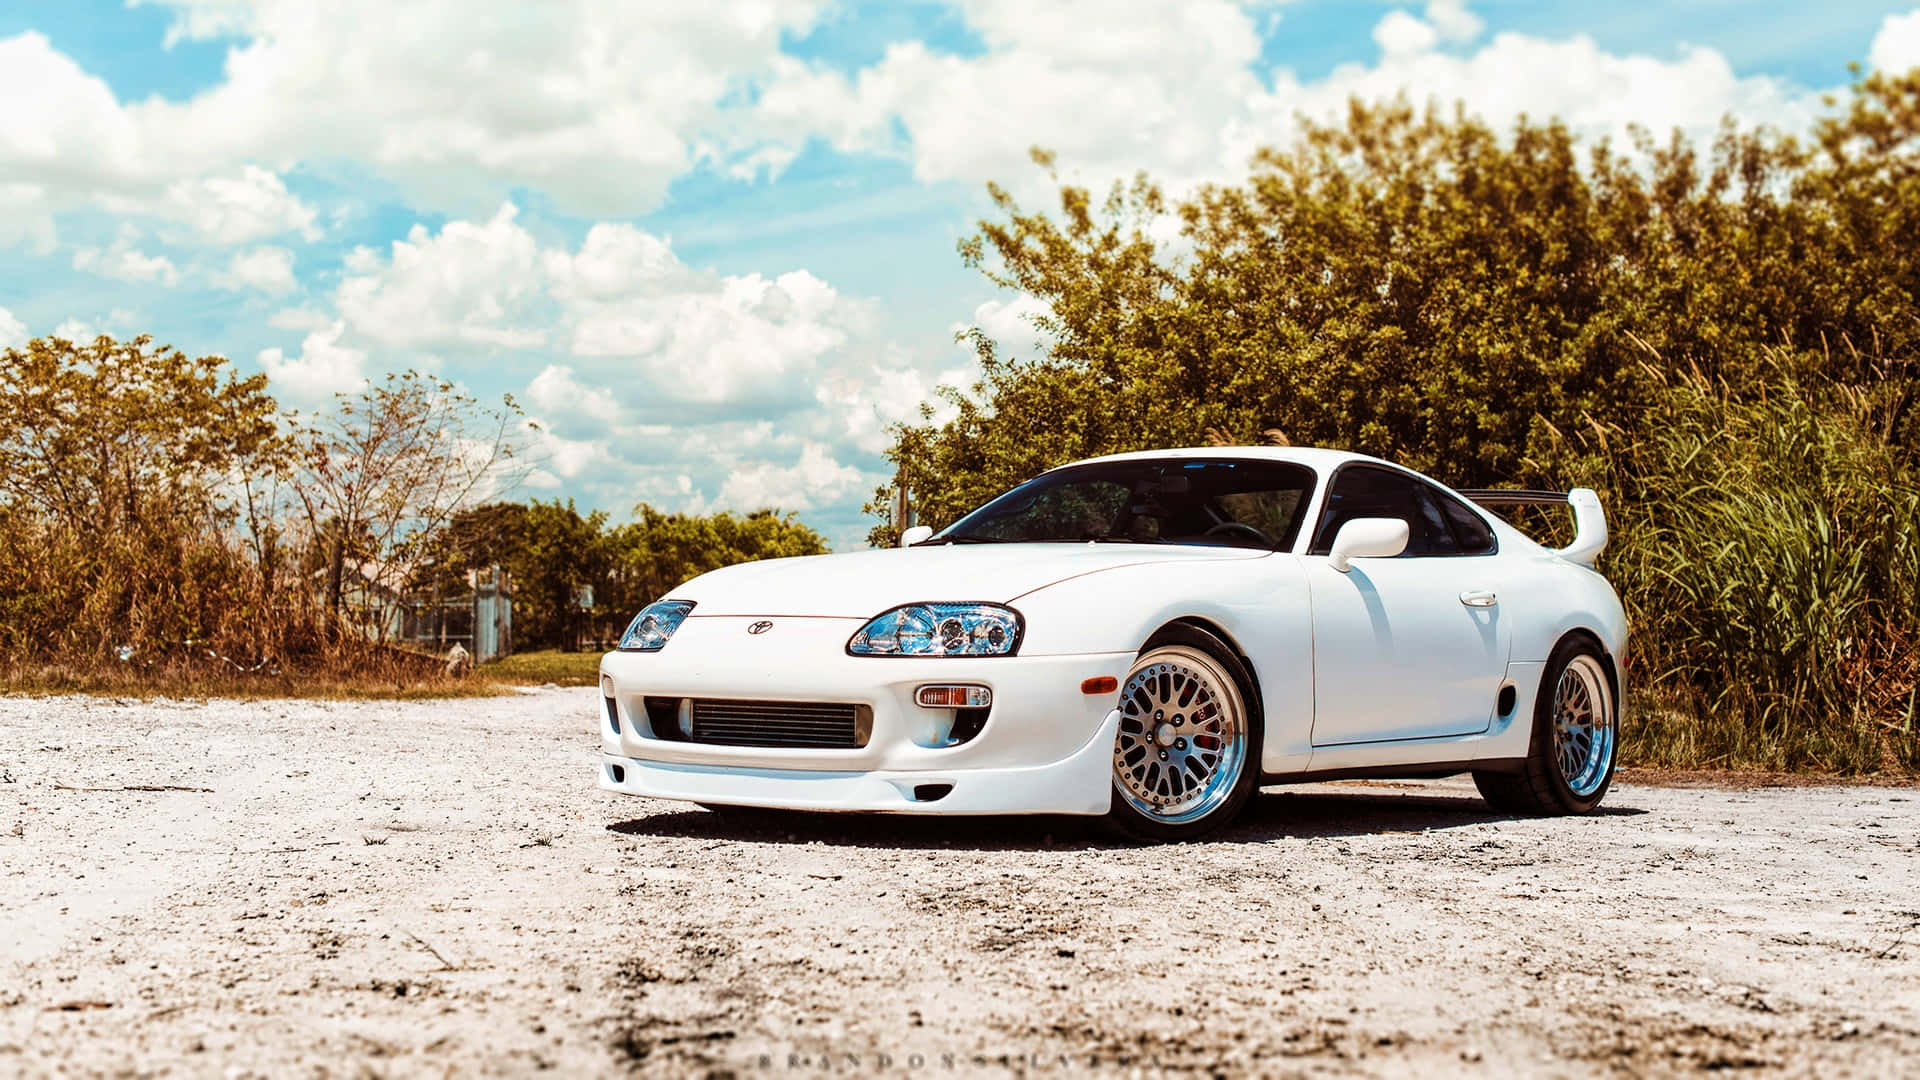 Toyota Supra Need For Speed Game 4k Toyota Supra Need For Speed Game 4k  wallpapers